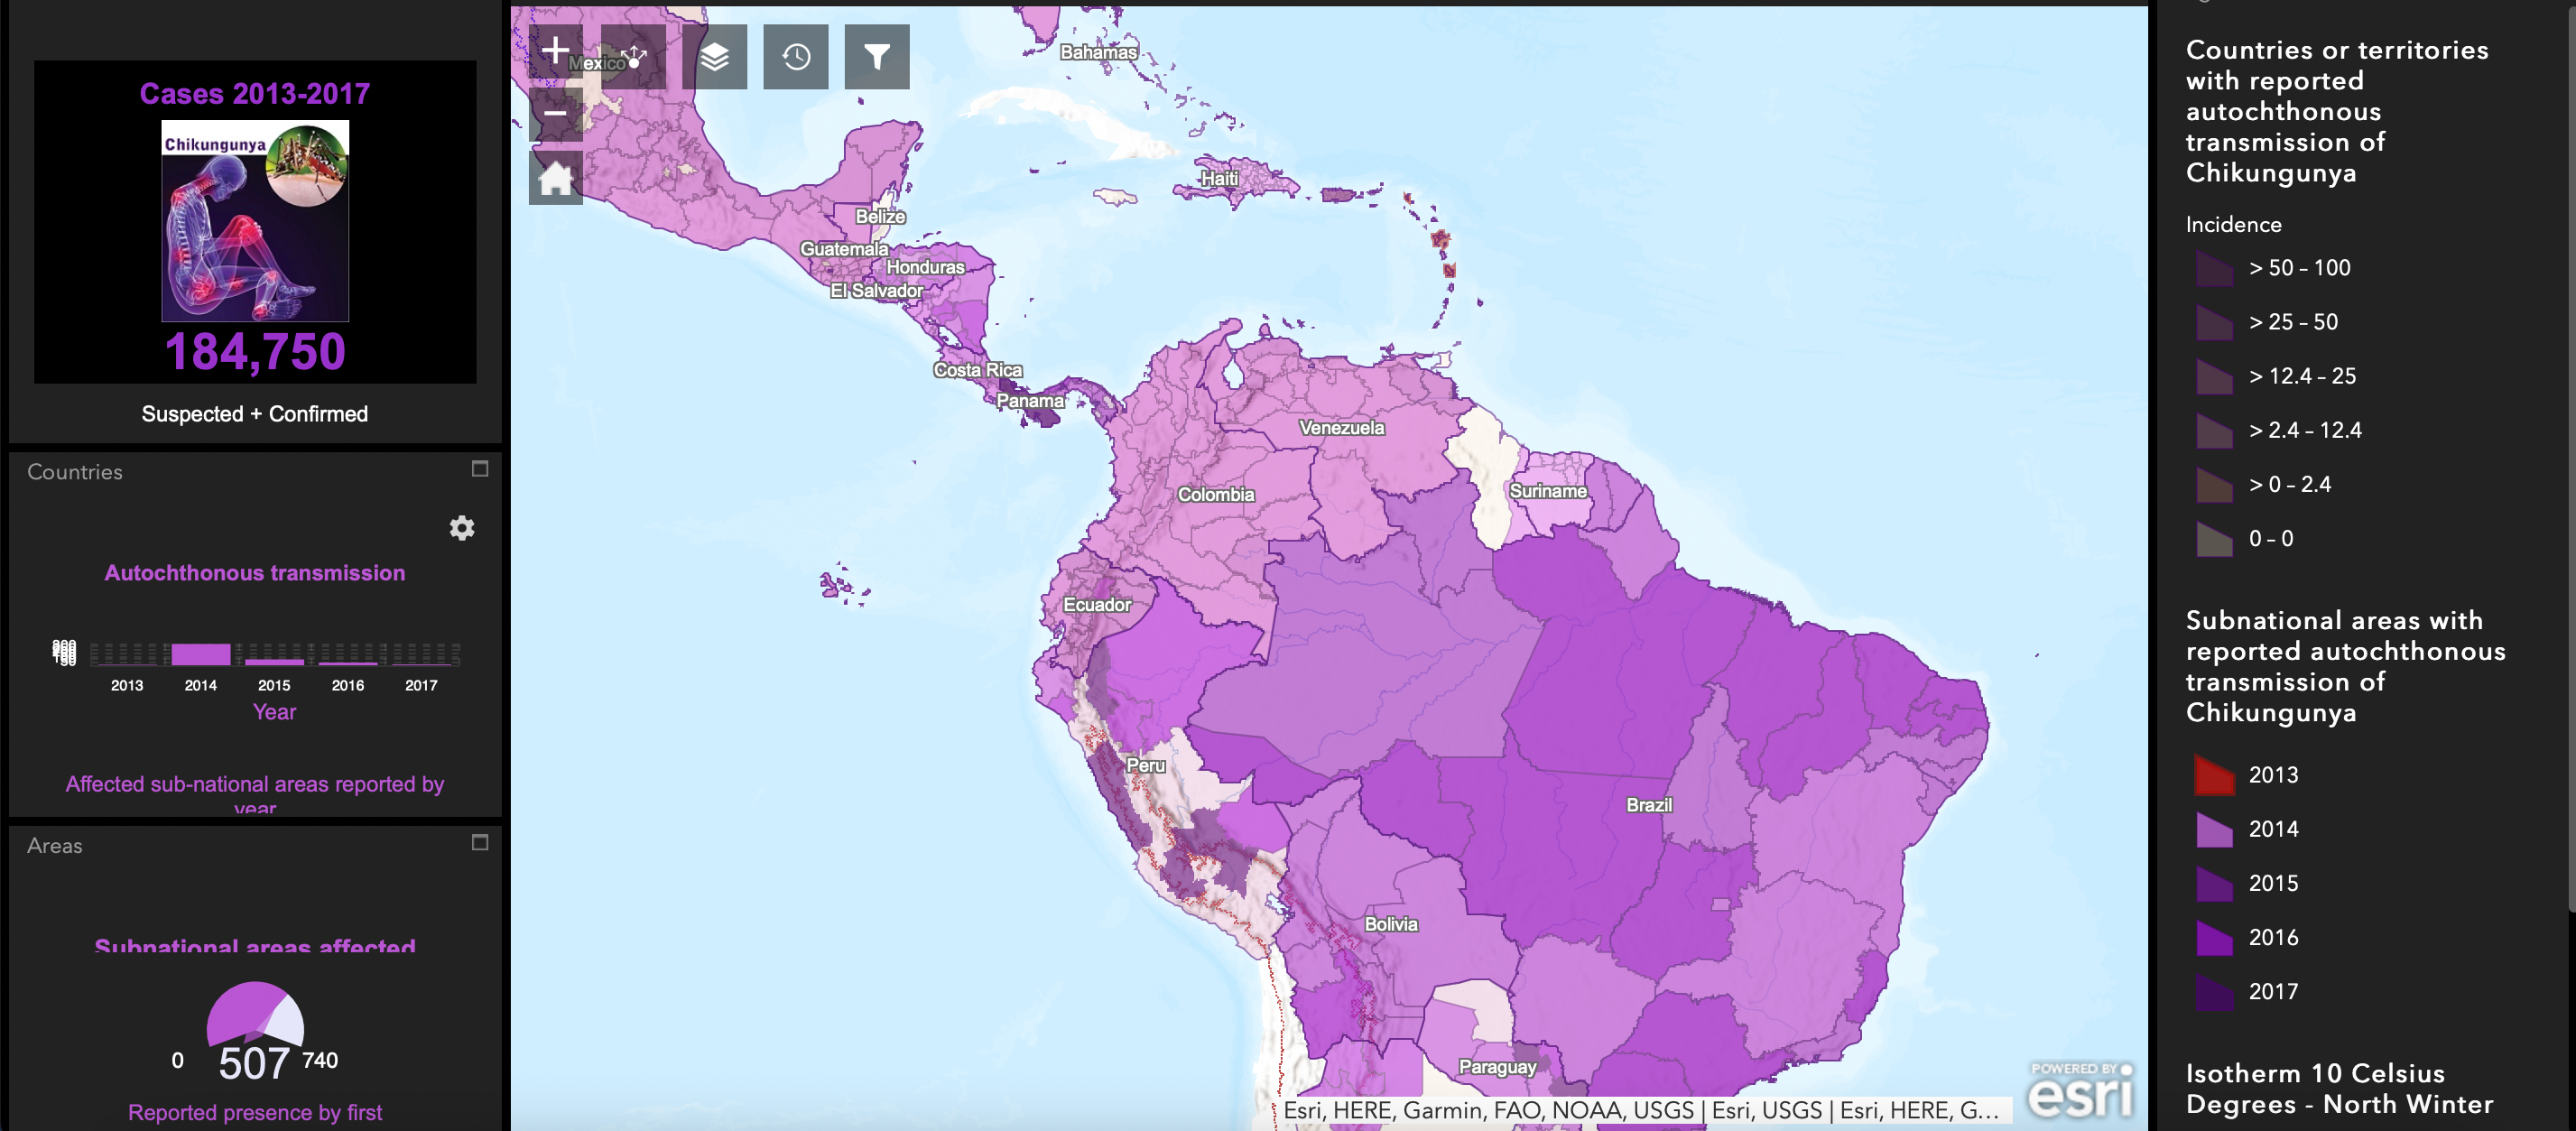 Chikunguya in the americas map